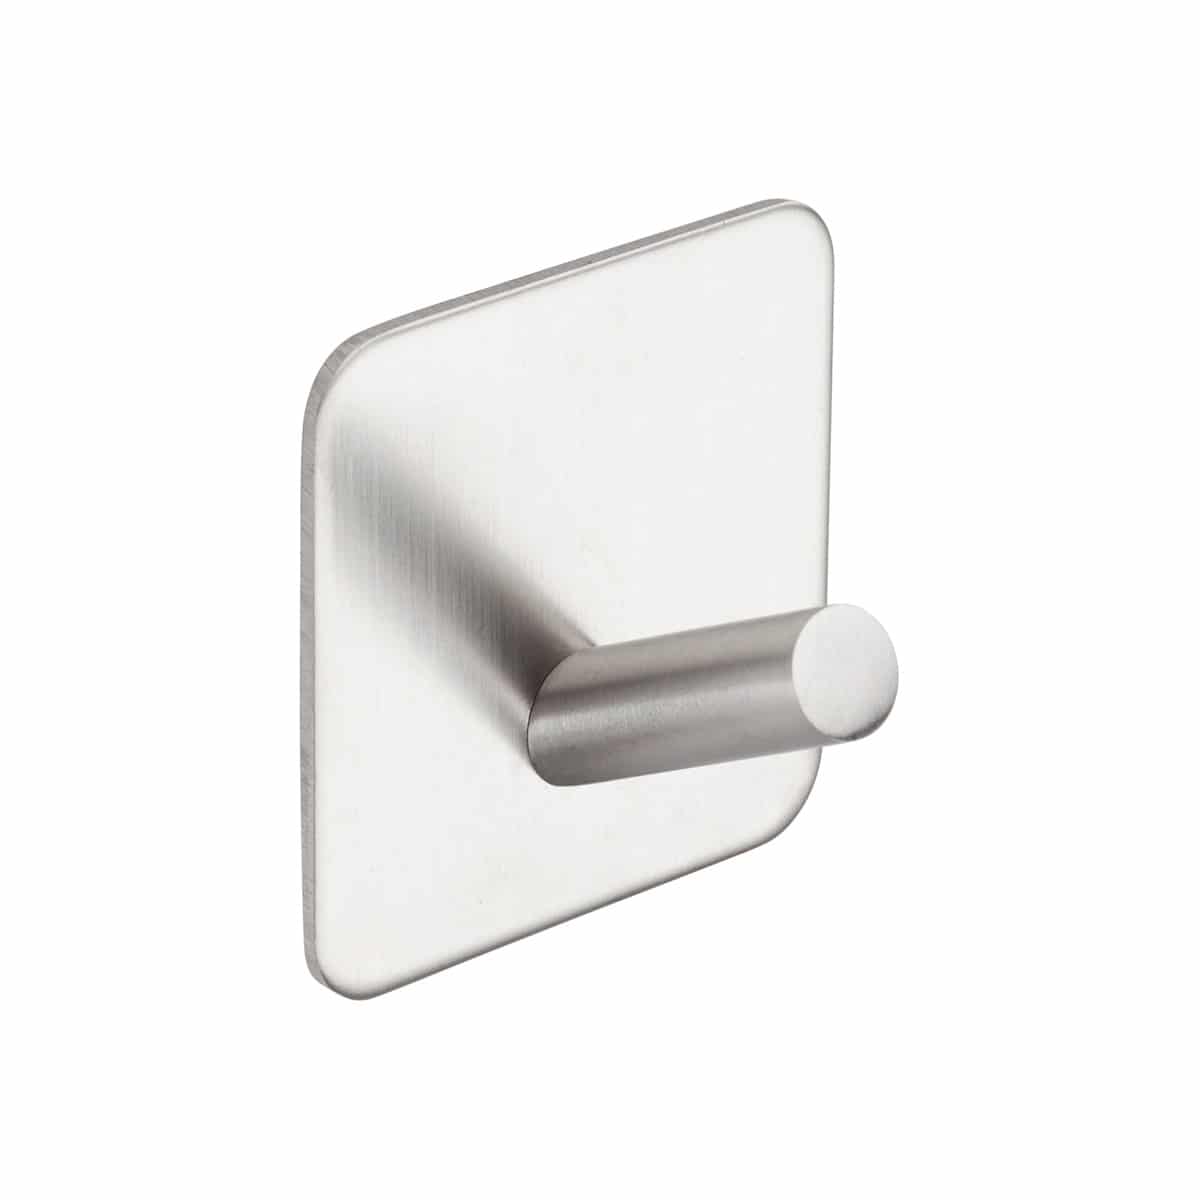 Modern Self Adhesive Square Hook Brushed Stainless Steel